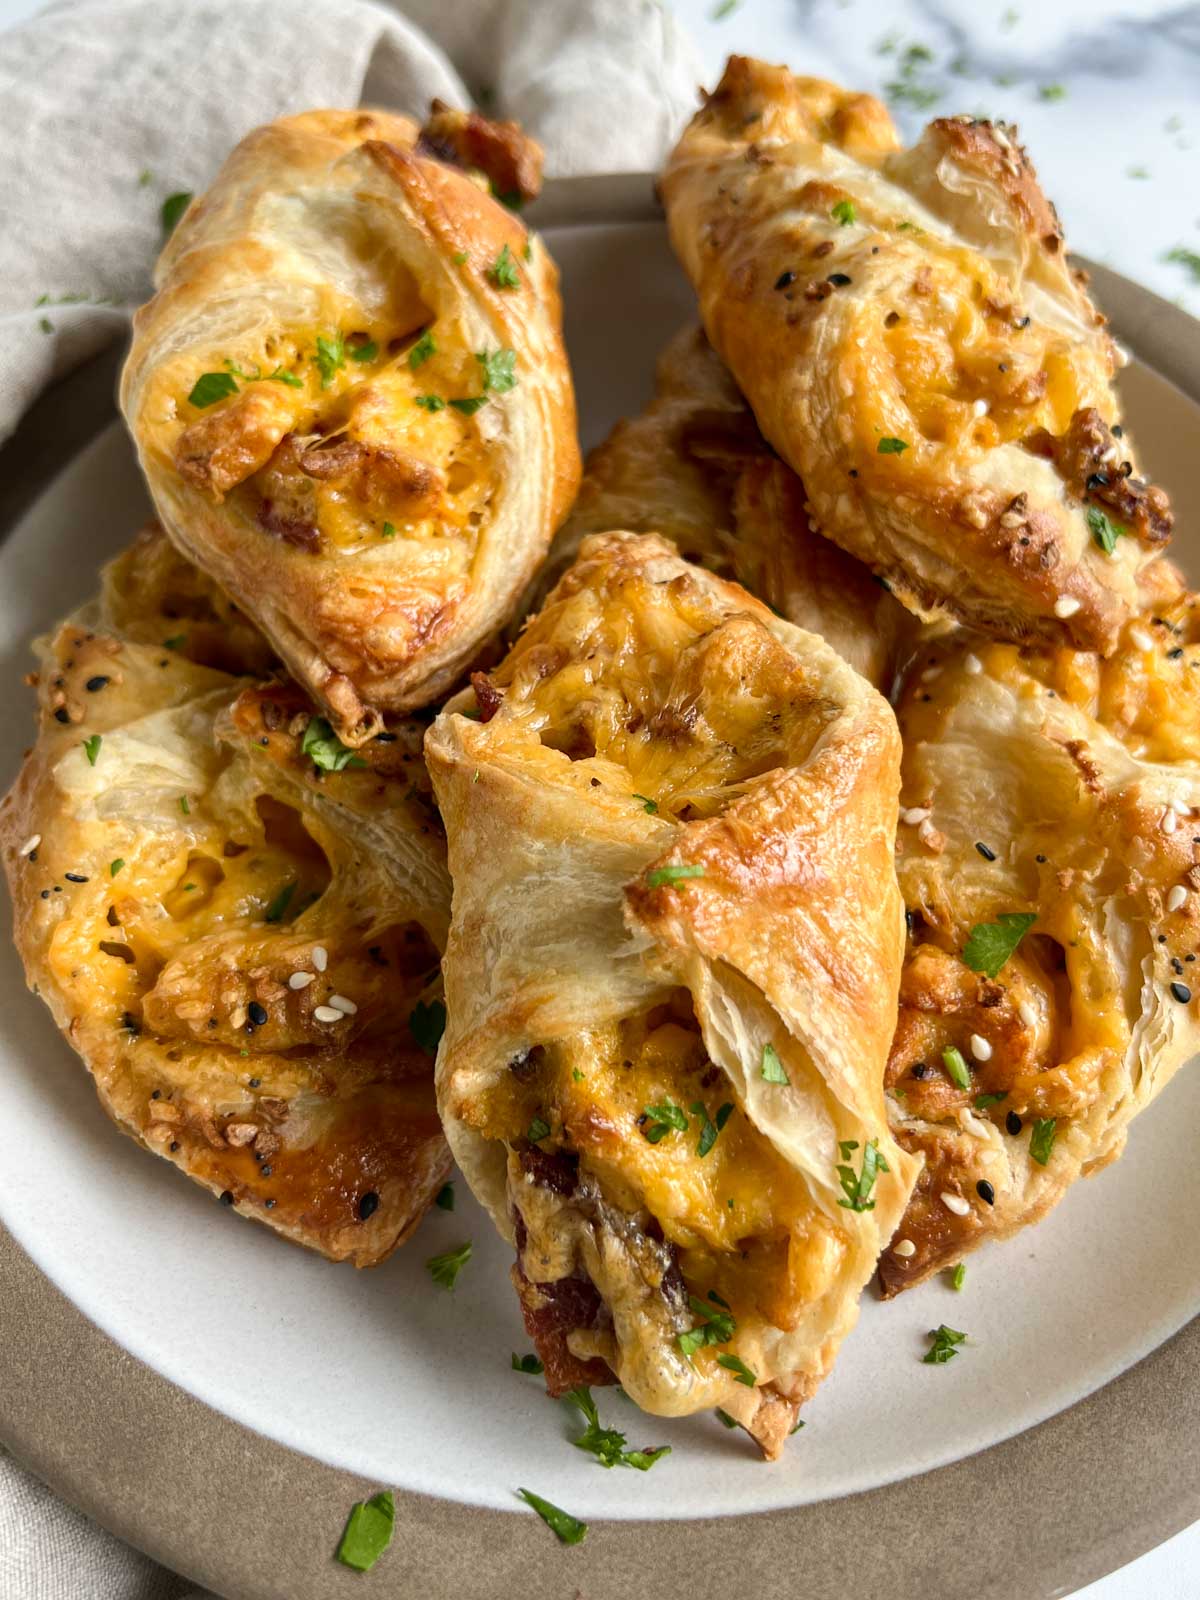 Egg, bacon, cheese wrapped in puff pastry on a plate